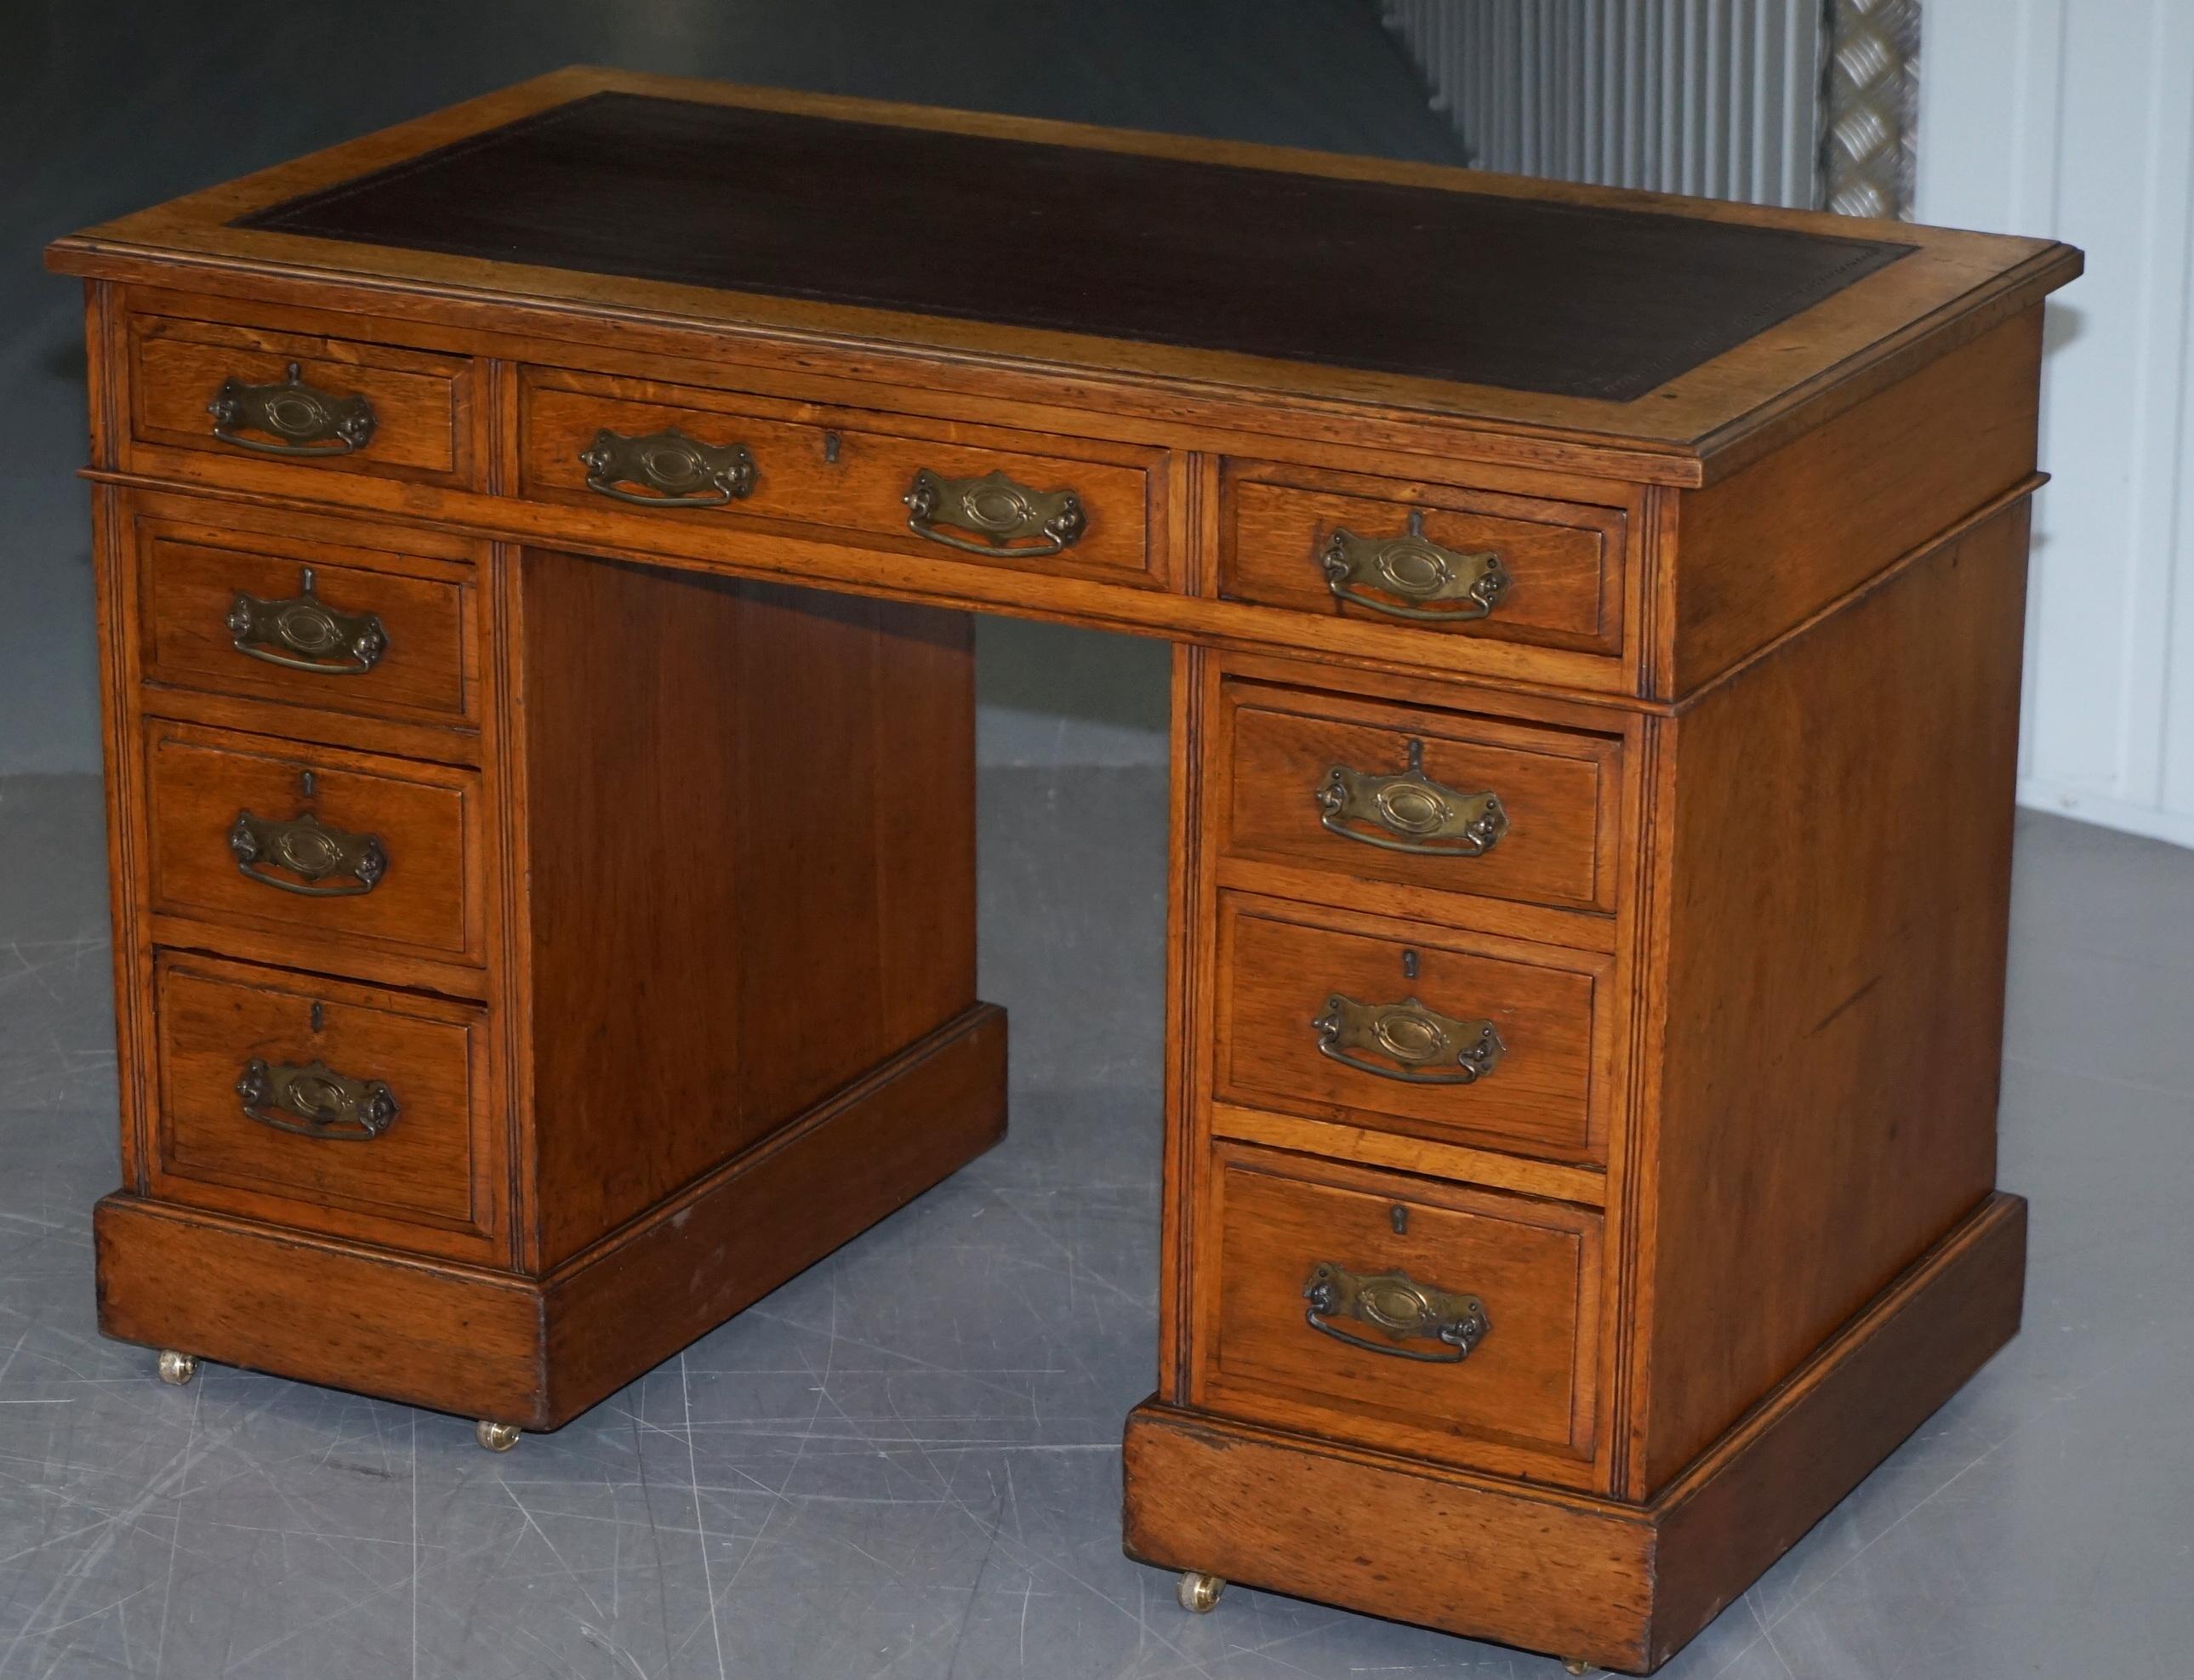 Hand-Crafted Victorian circa 1880 English Oak Twin Pedestal Partner Desk Oxblood Leather Top